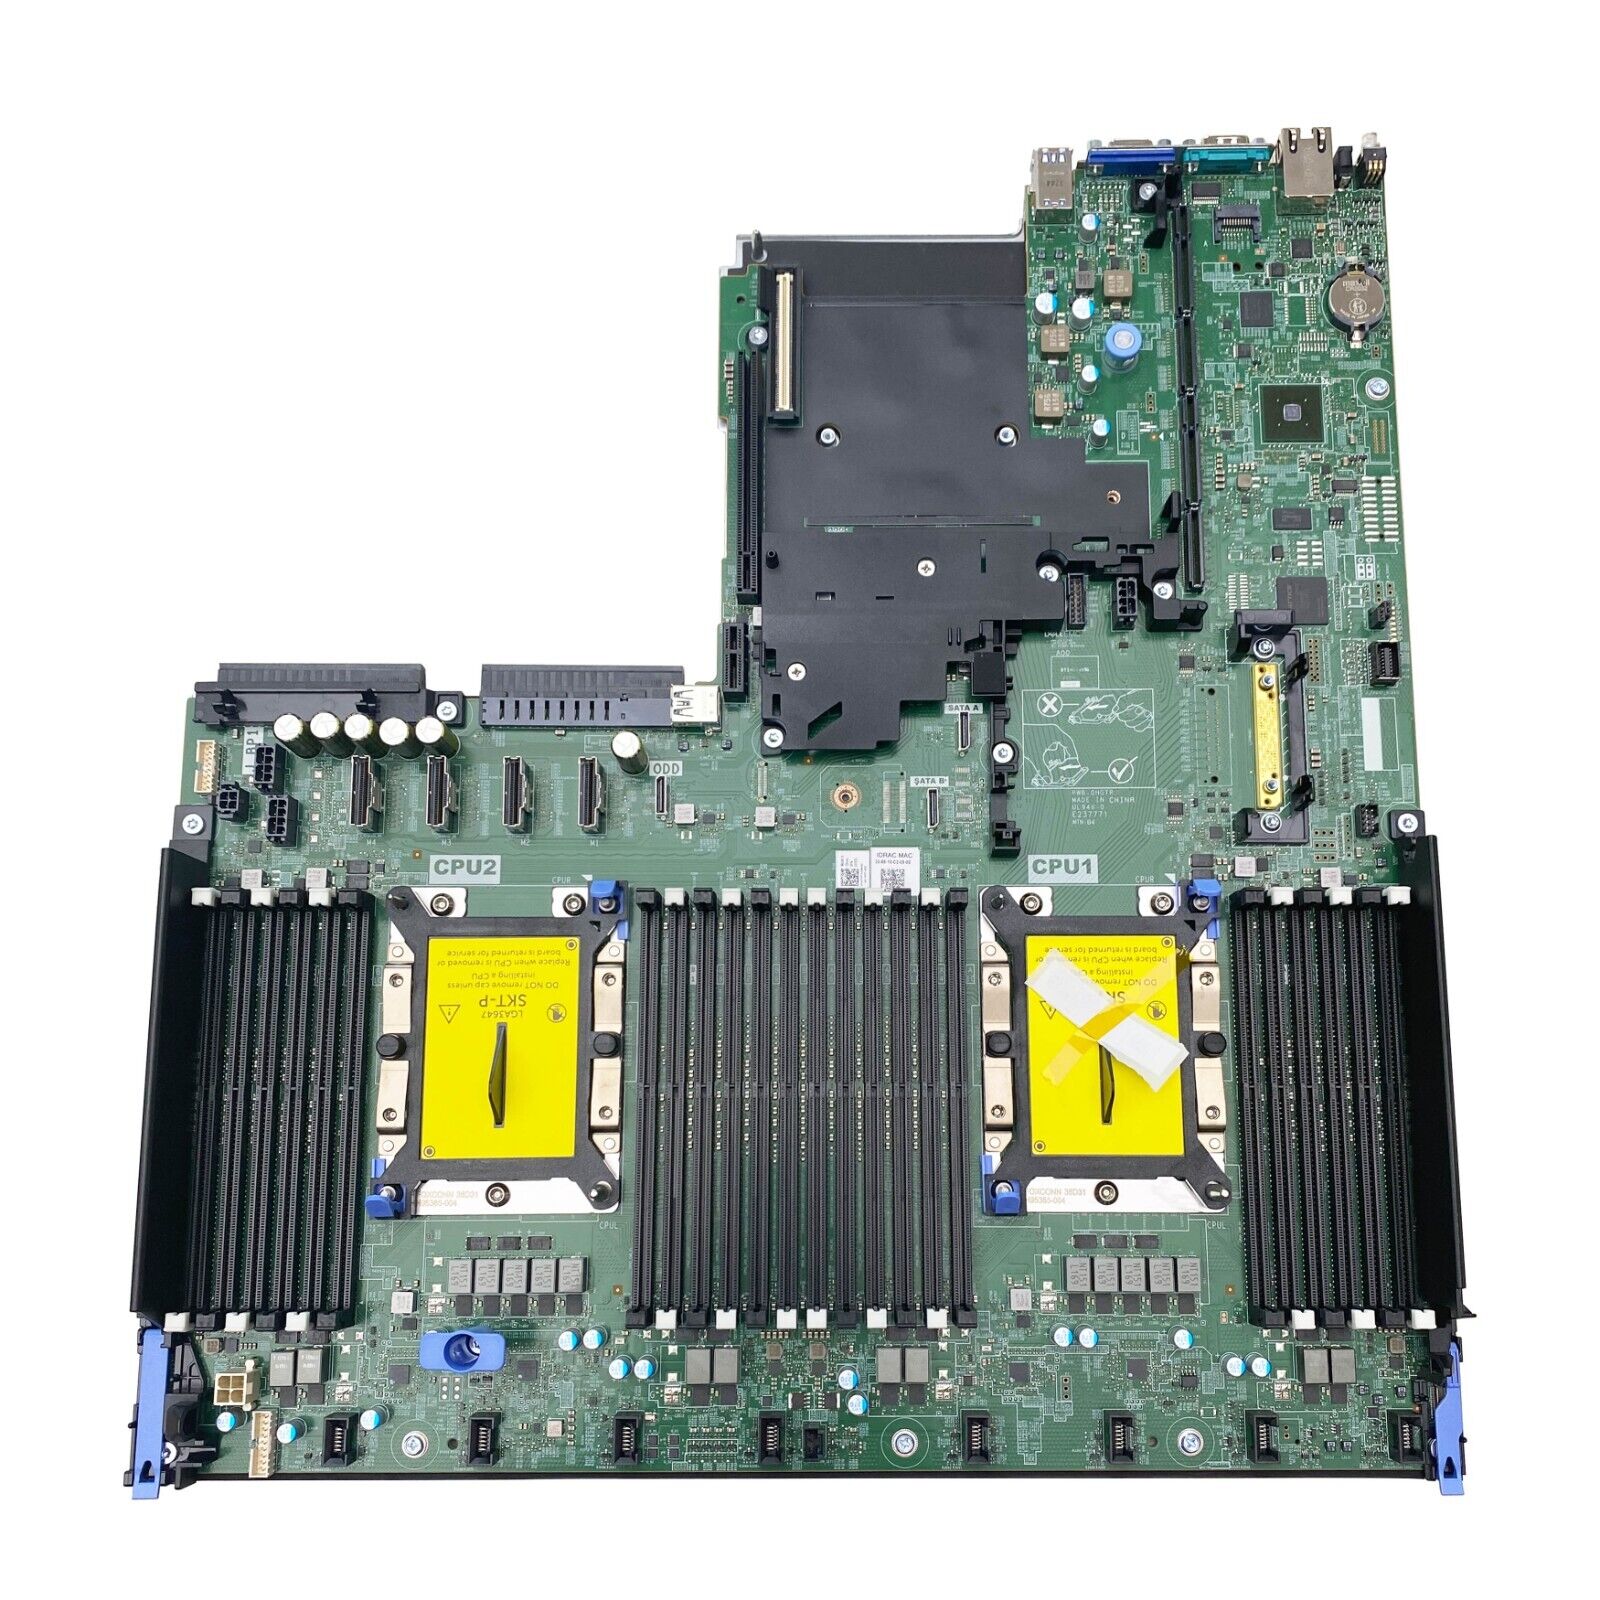  New Dell PowerEdge R640 Main System Board Motherboard Mainboard